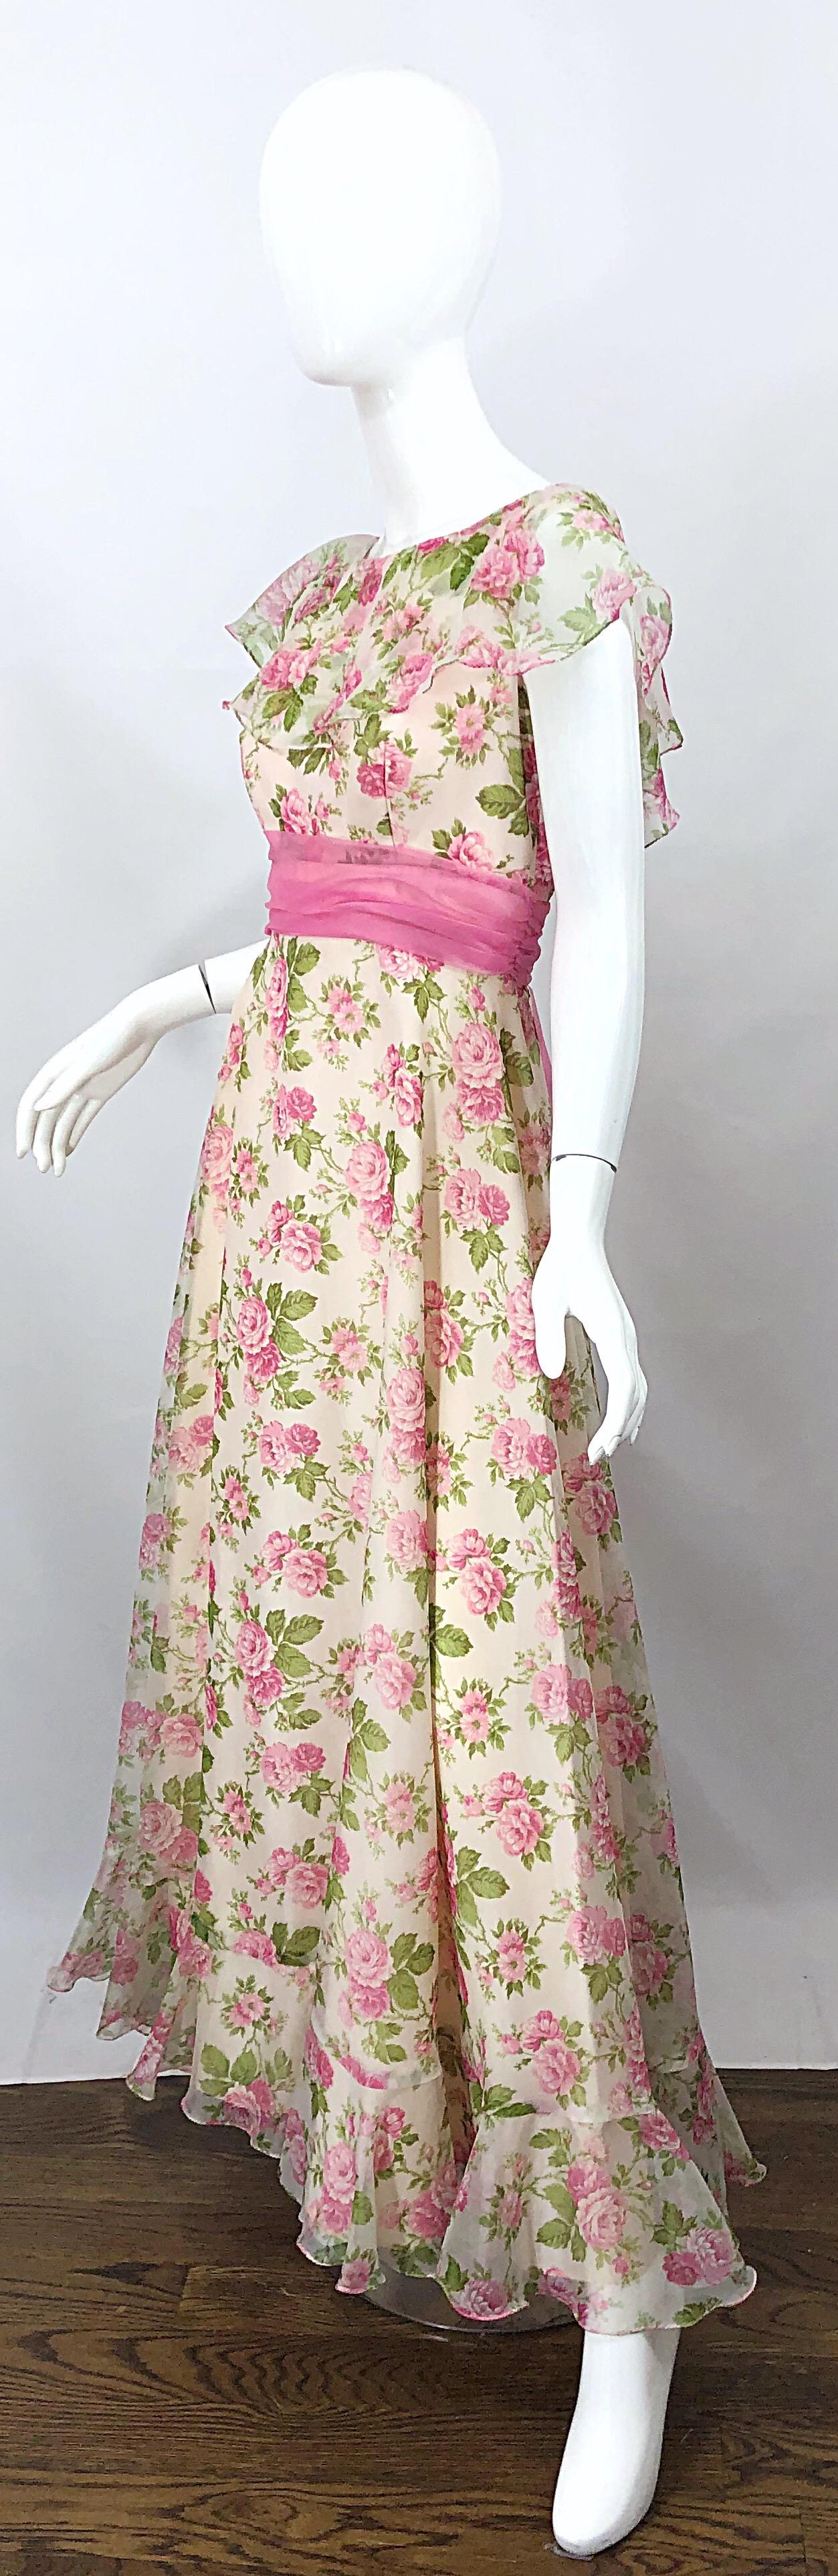 Women's Sylvia Ann 1970s Rose Print Pink Ivory Chiffon Vintage 70s Maxi Dress Gown For Sale